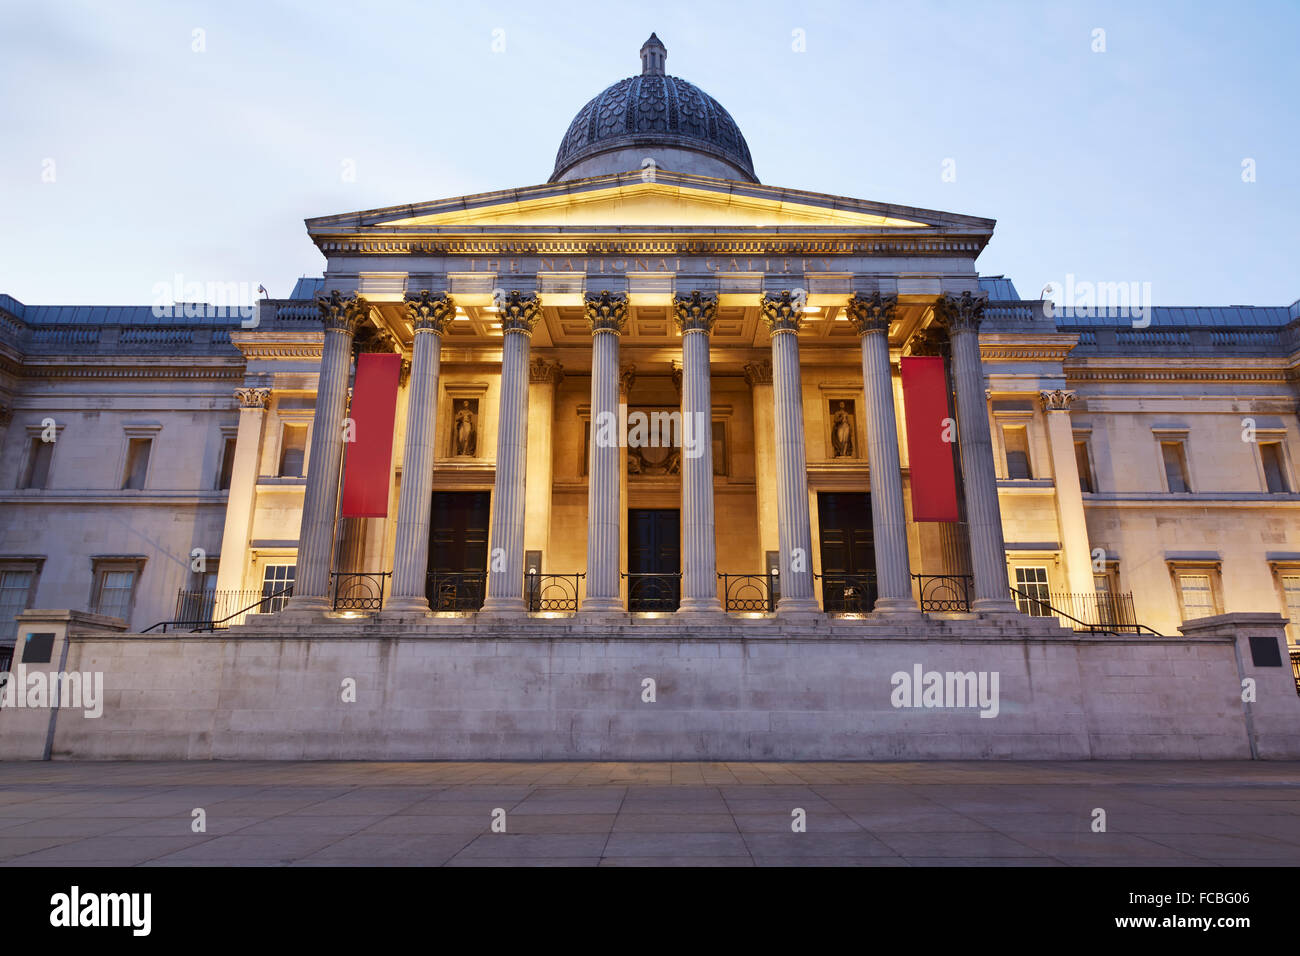 The National Gallery facade illuminated at dusk in London Stock Photo